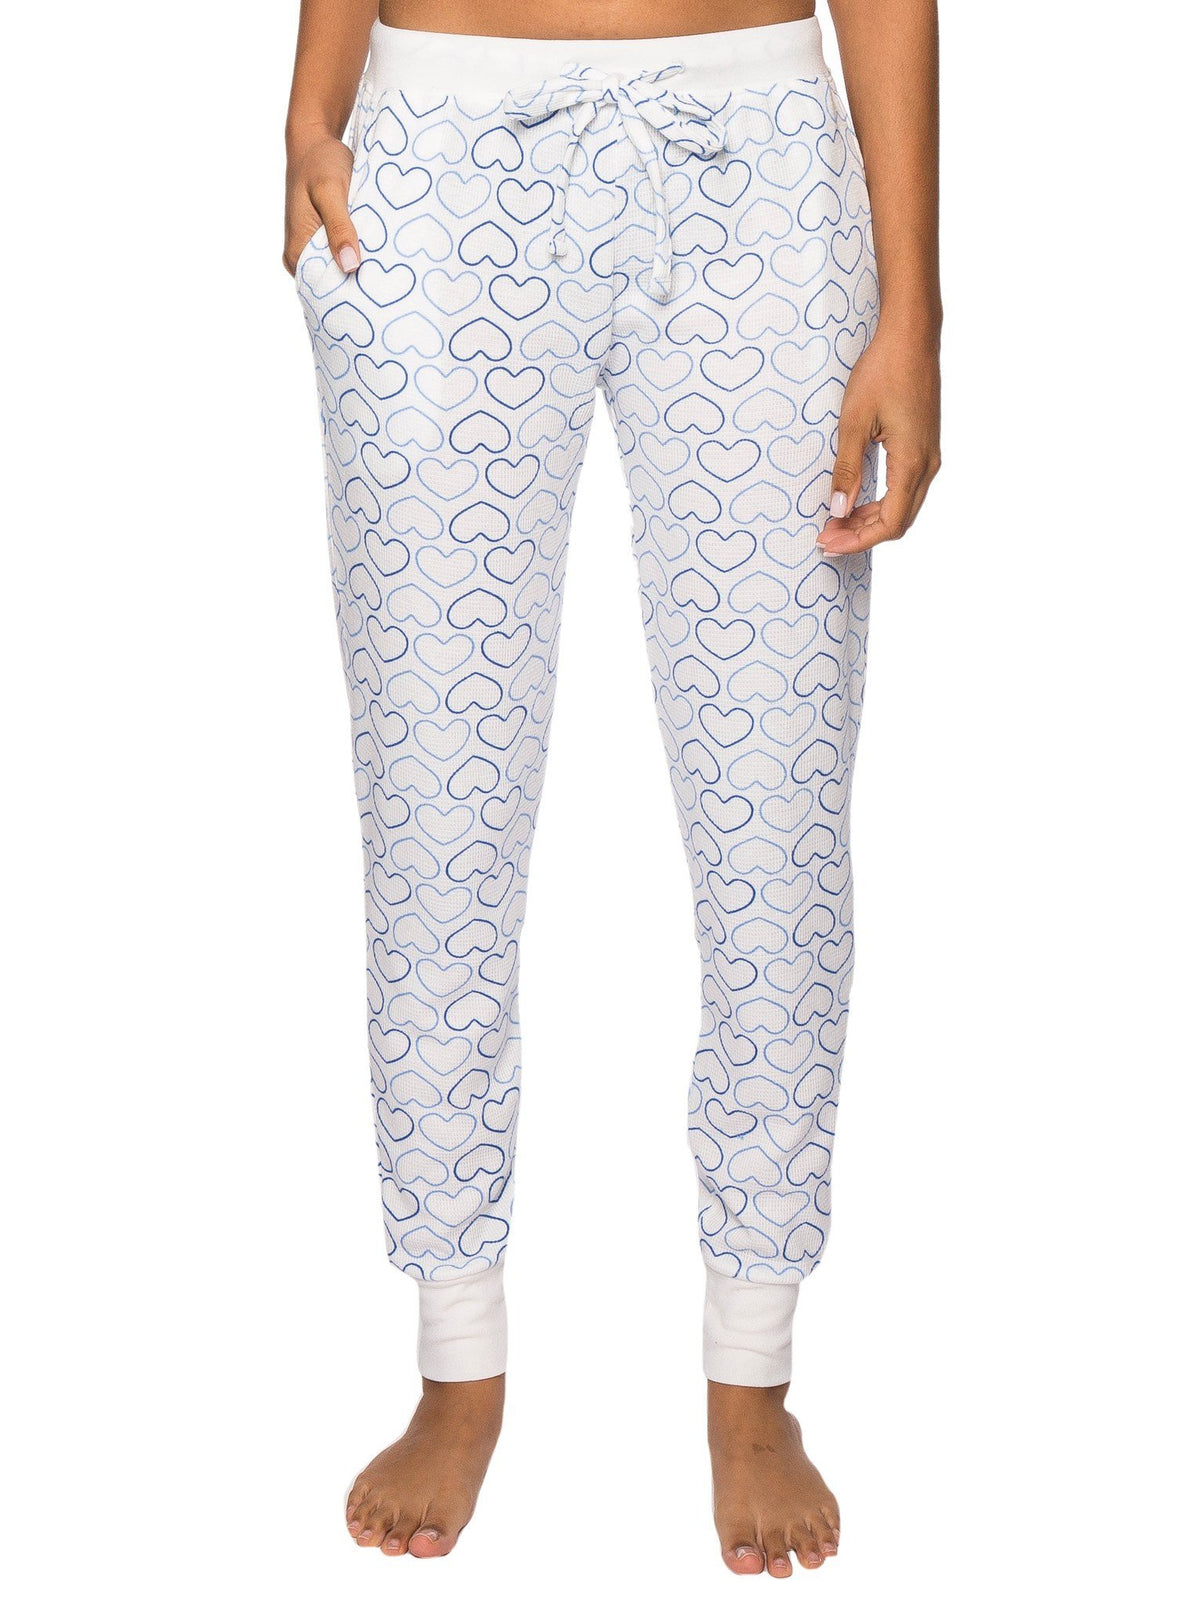 Women's Waffle Knit Thermal Jogger Lounge Pants - Tile of Hearts White/Blue